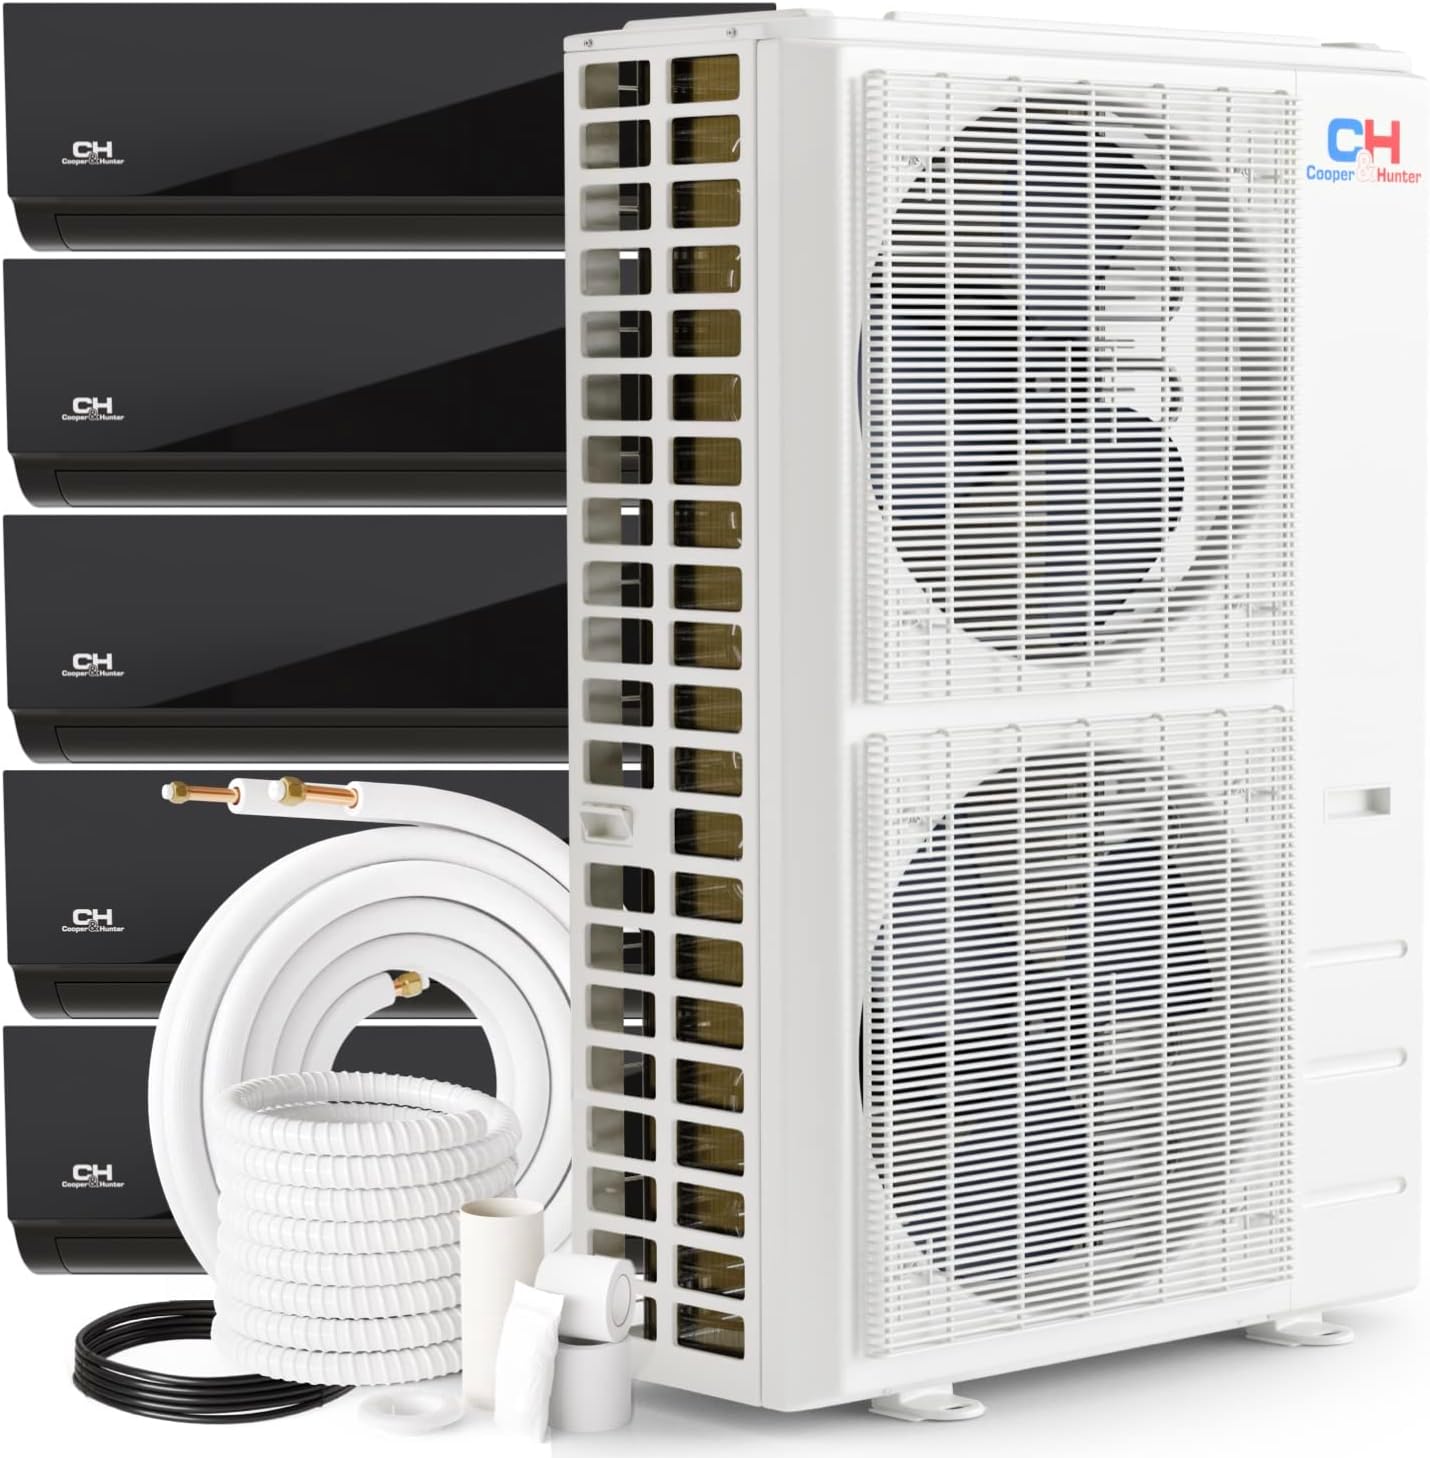 Cooper & Hunter 48,000 BTU Olivia Series, Midnight Edition, Five Zone 6000 + 6000 + 6000 + 6000 + 24000 BTU Wall Mount Air Handlers Ductless Mini Split A/C and Heater Including Installation Kits